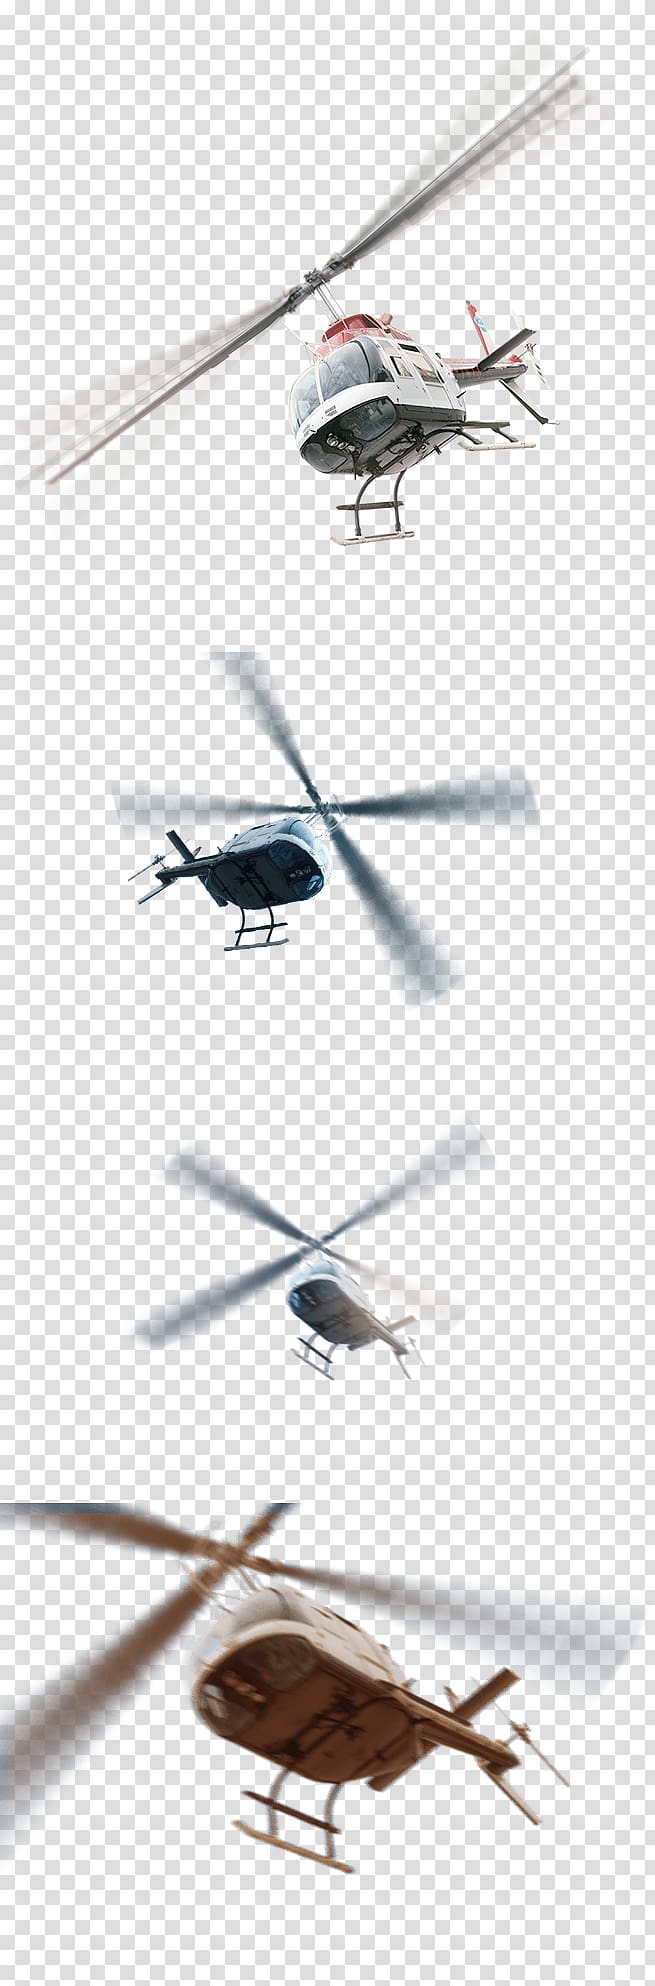 four helicoptersd collage, Helicopter rotor Airplane, HD helicopter aircraft Posters transparent background PNG clipart